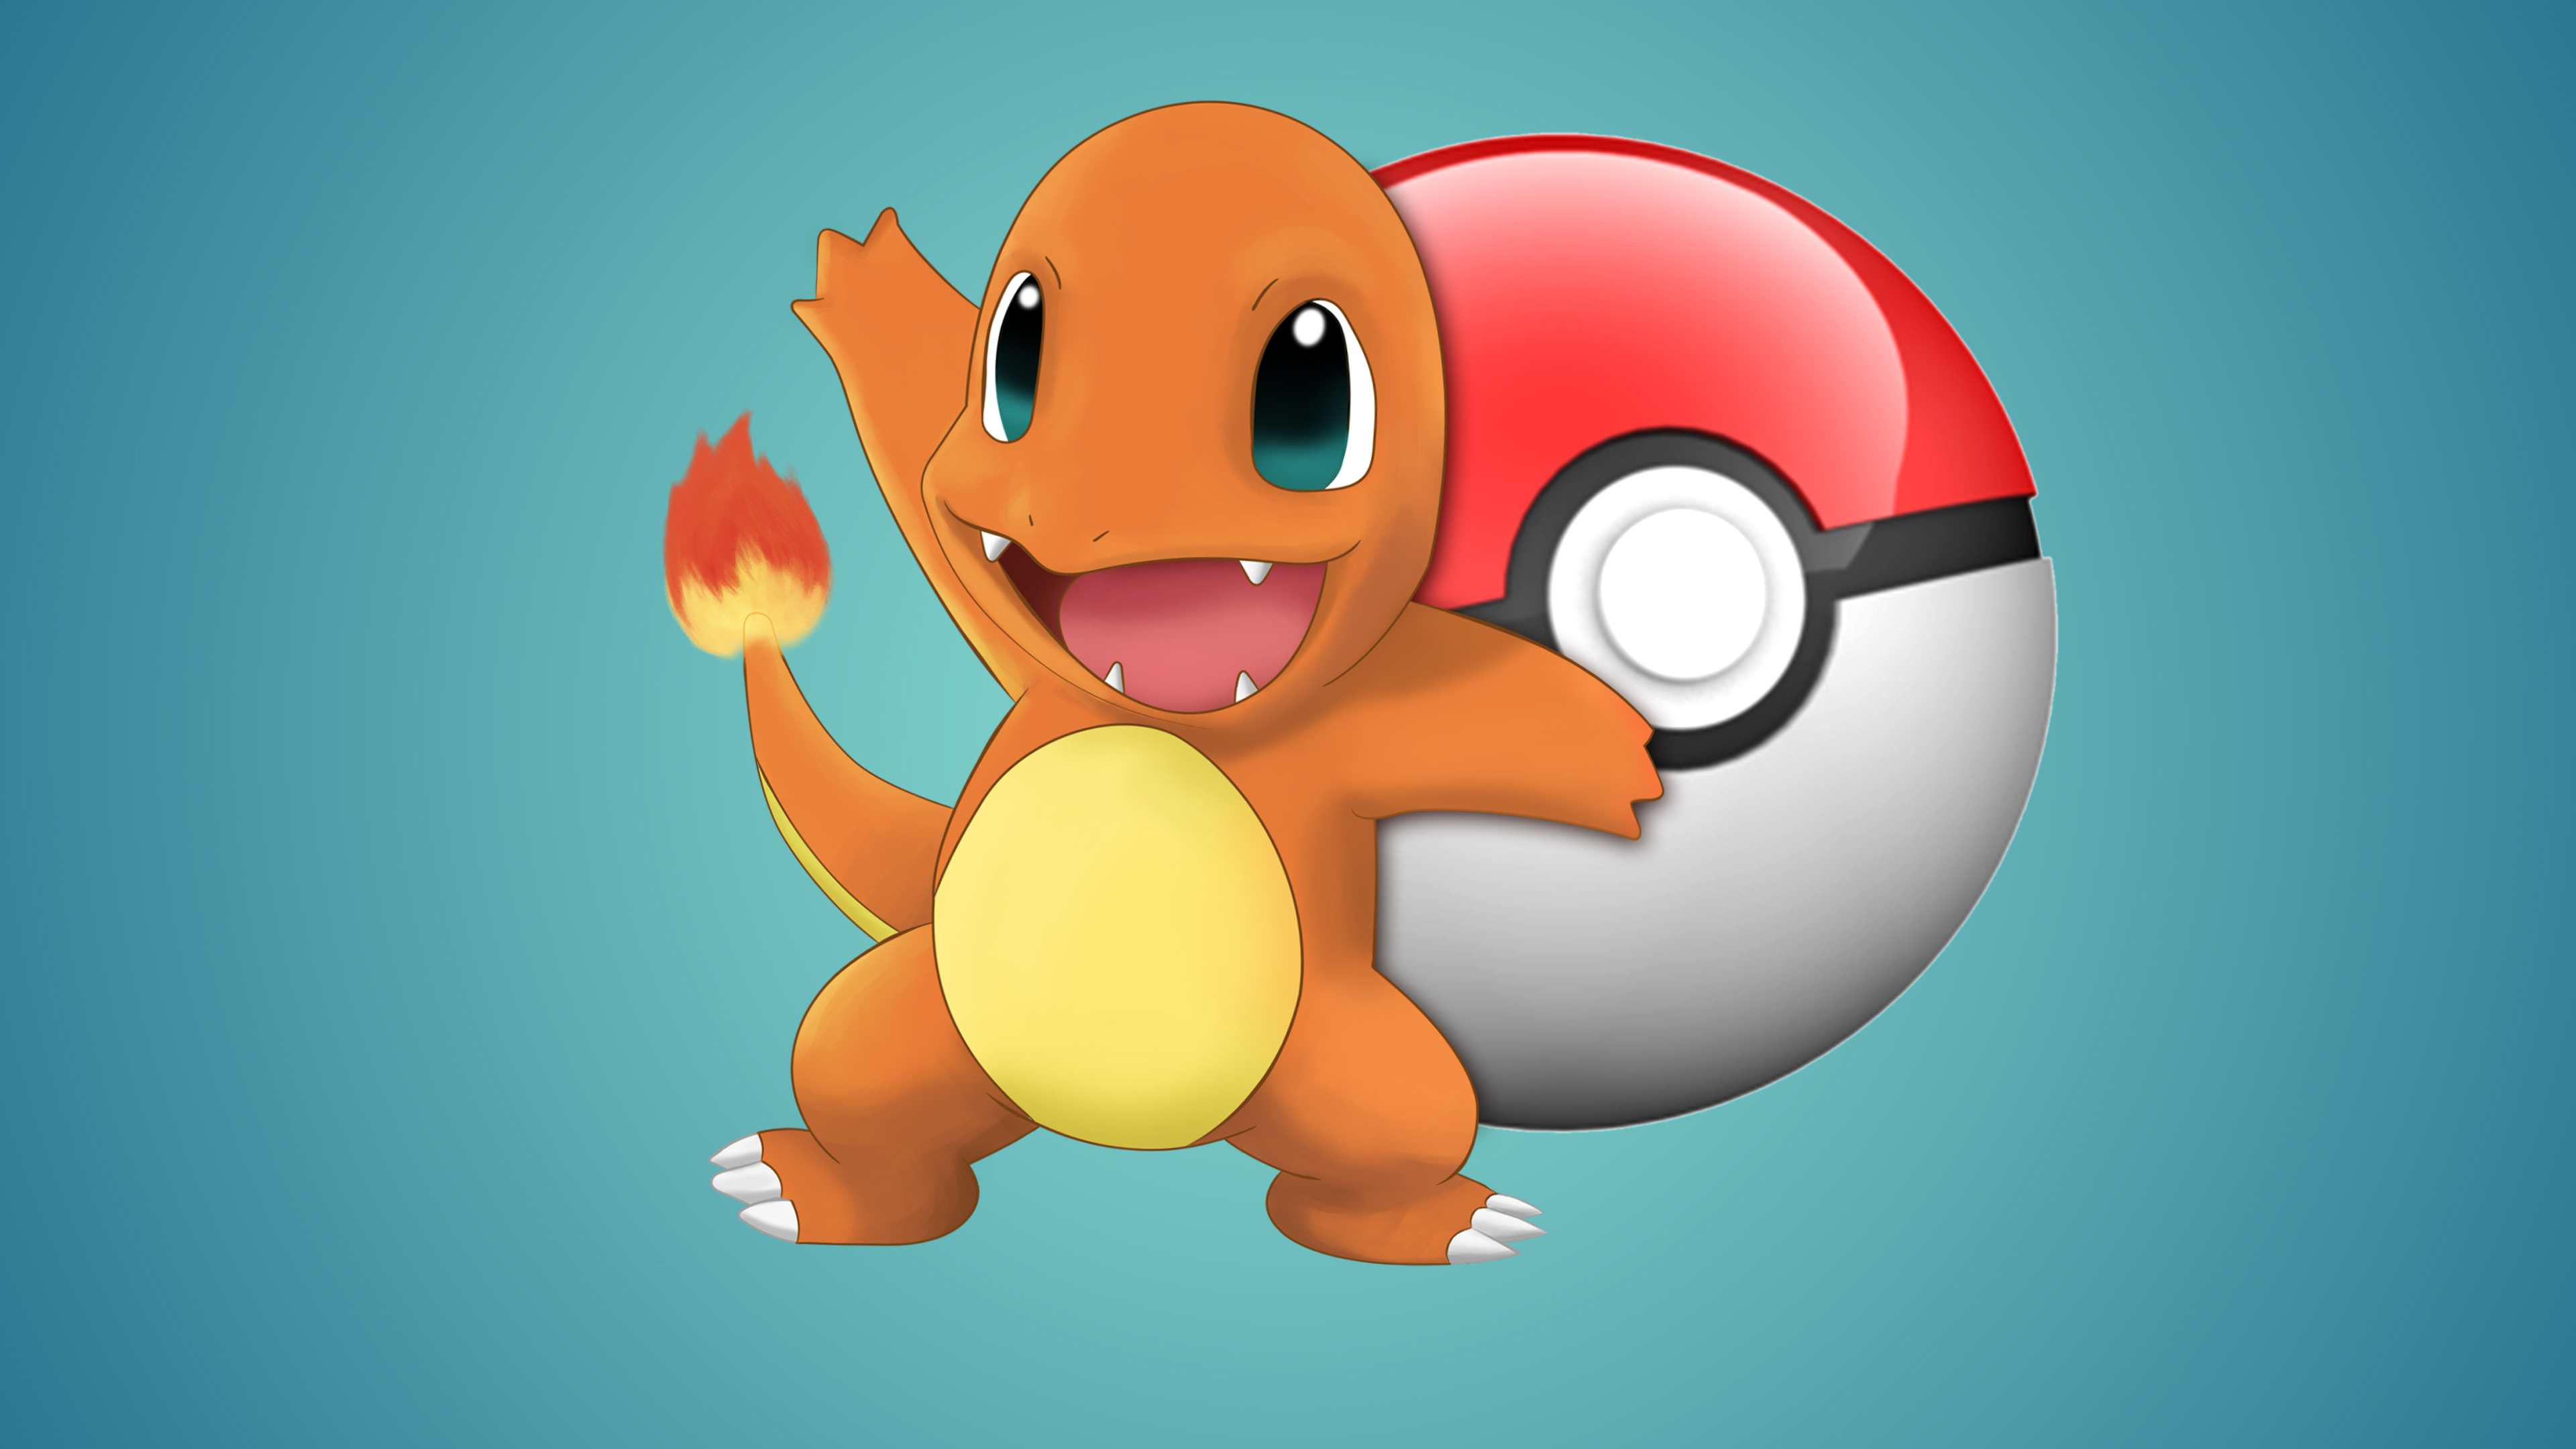 Download free HD wallpaper from above link pokemon CharmanderHDWallpaper  CharmanderHDWallpaper PokemonChar  Pokemon charizard Charmander  Pokemon charmander